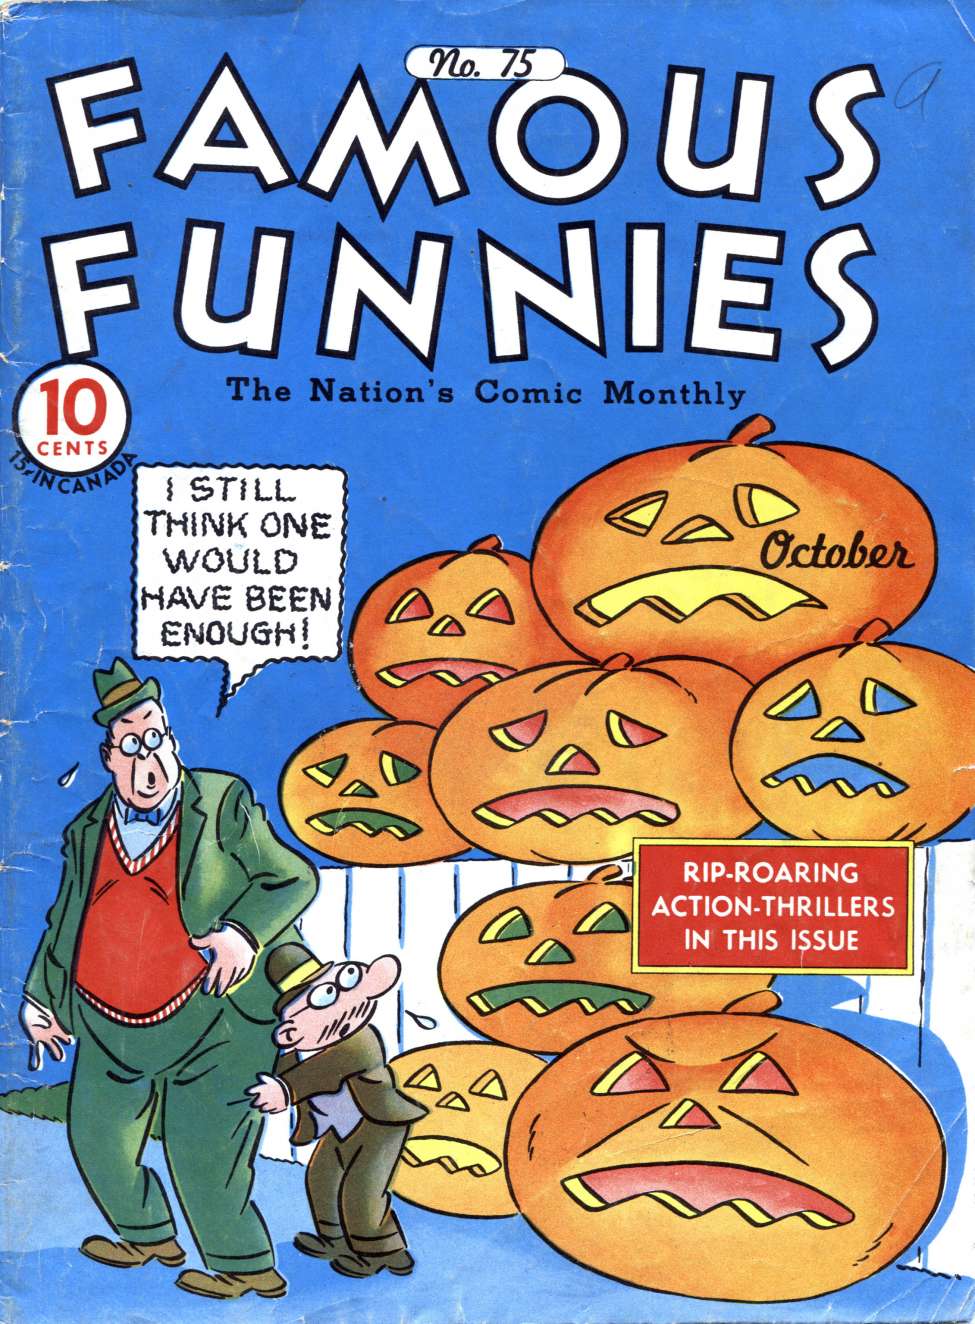 Book Cover For Famous Funnies 75